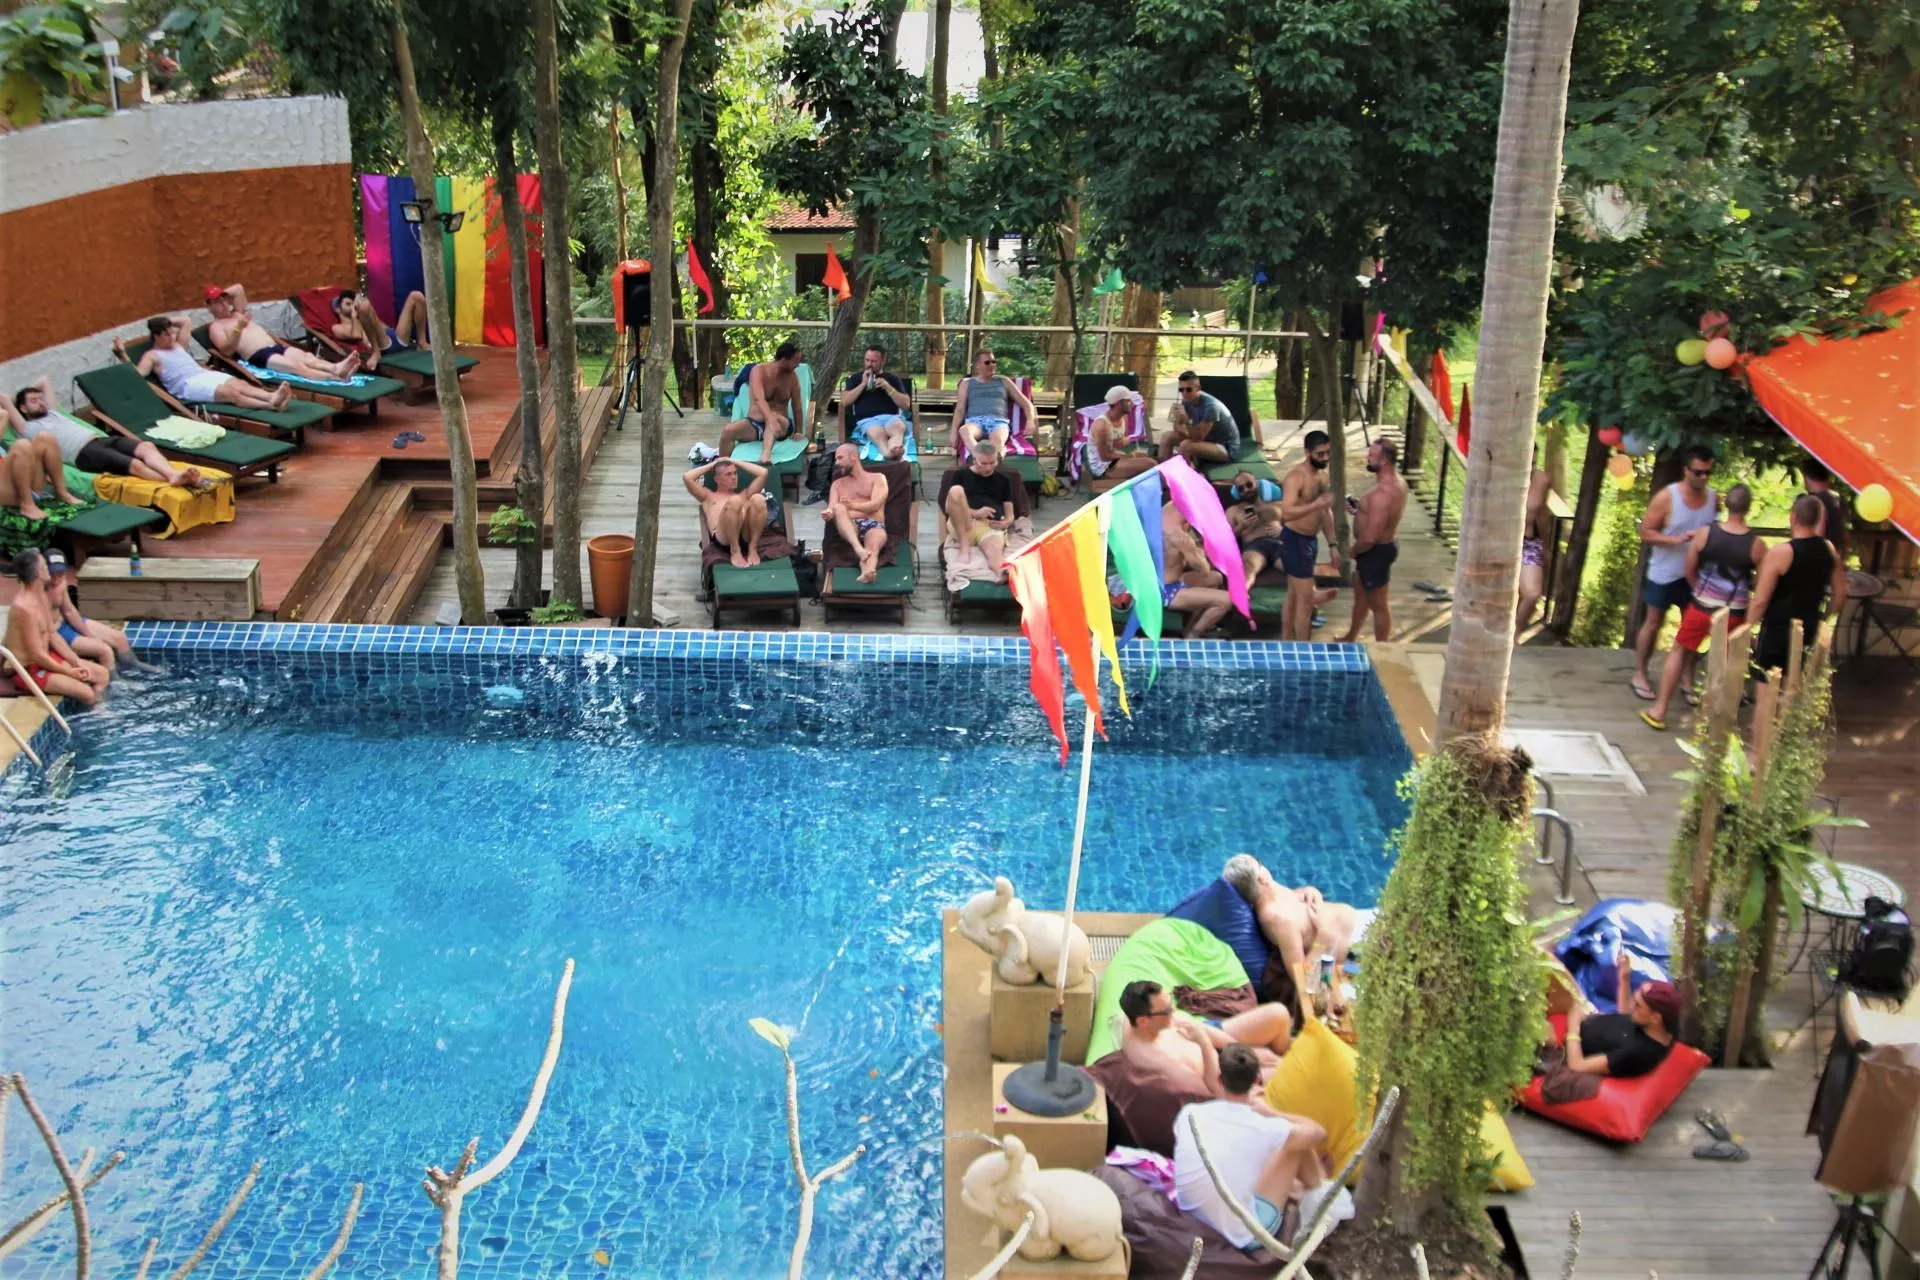 Alpha Gay in Thailand, Central Asia | LGBT-Friendly Places - Rated 0.8